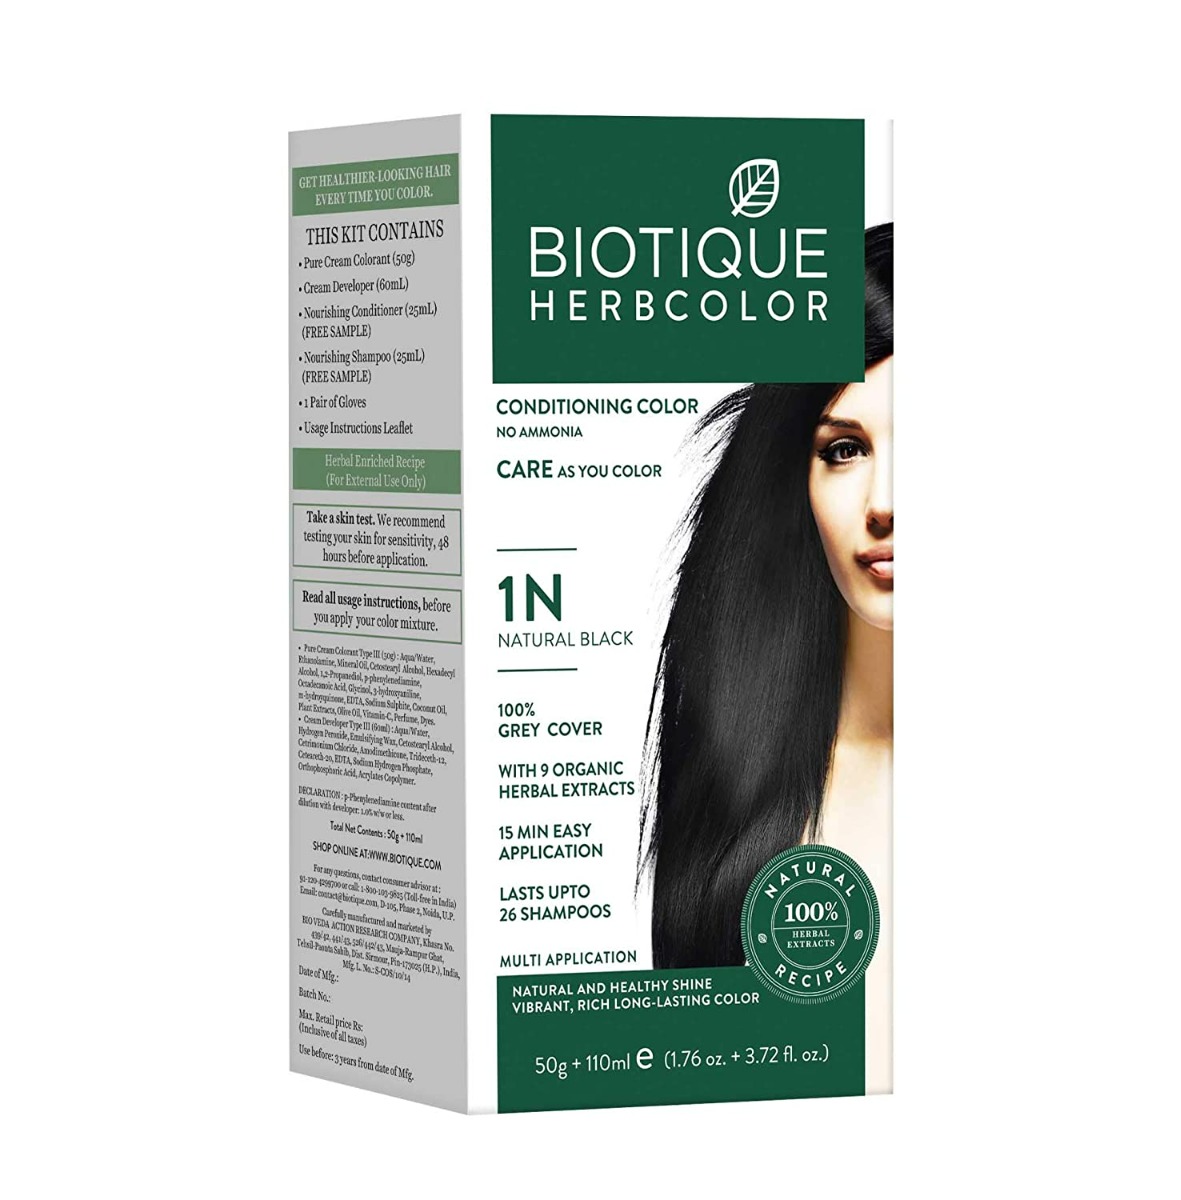 Biotique Bio Herbcolor Conditioning Hair Color, 50g + 110ml - Natural Black  1N